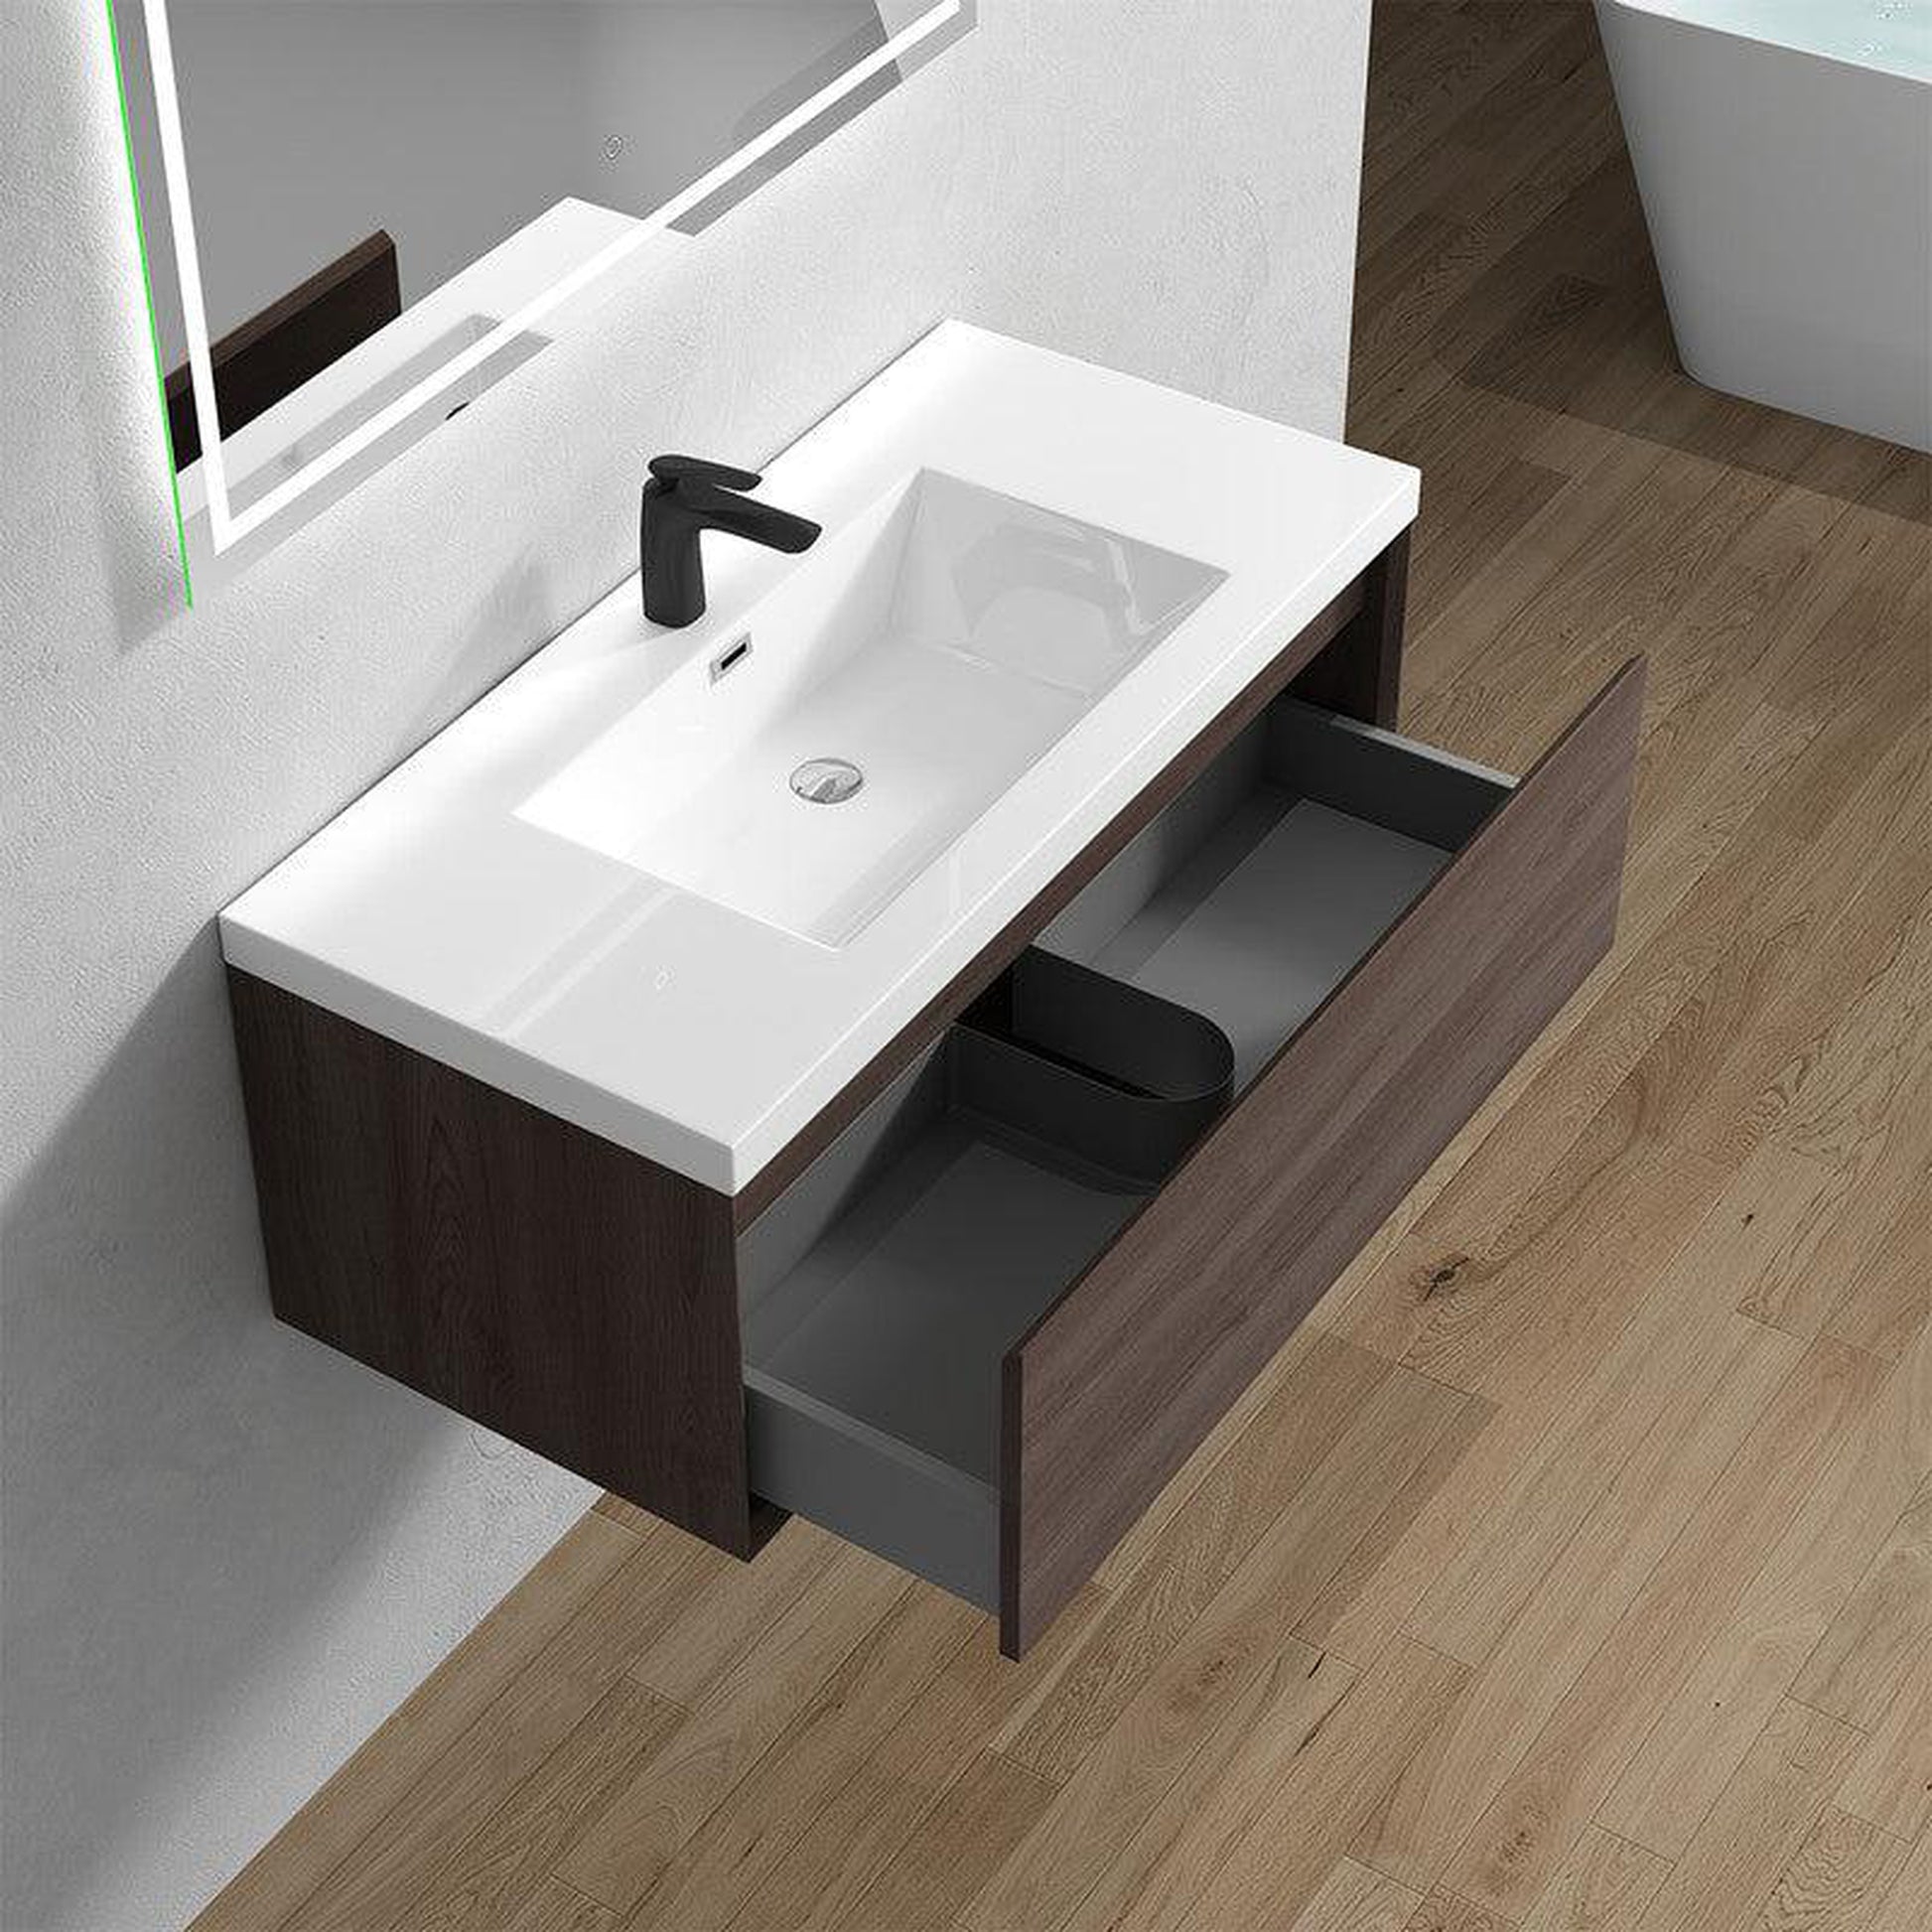 Moreno Bath BELLA 42" Red Oak Wall-Mounted Vanity With Single Reinforced White Acrylic Sink